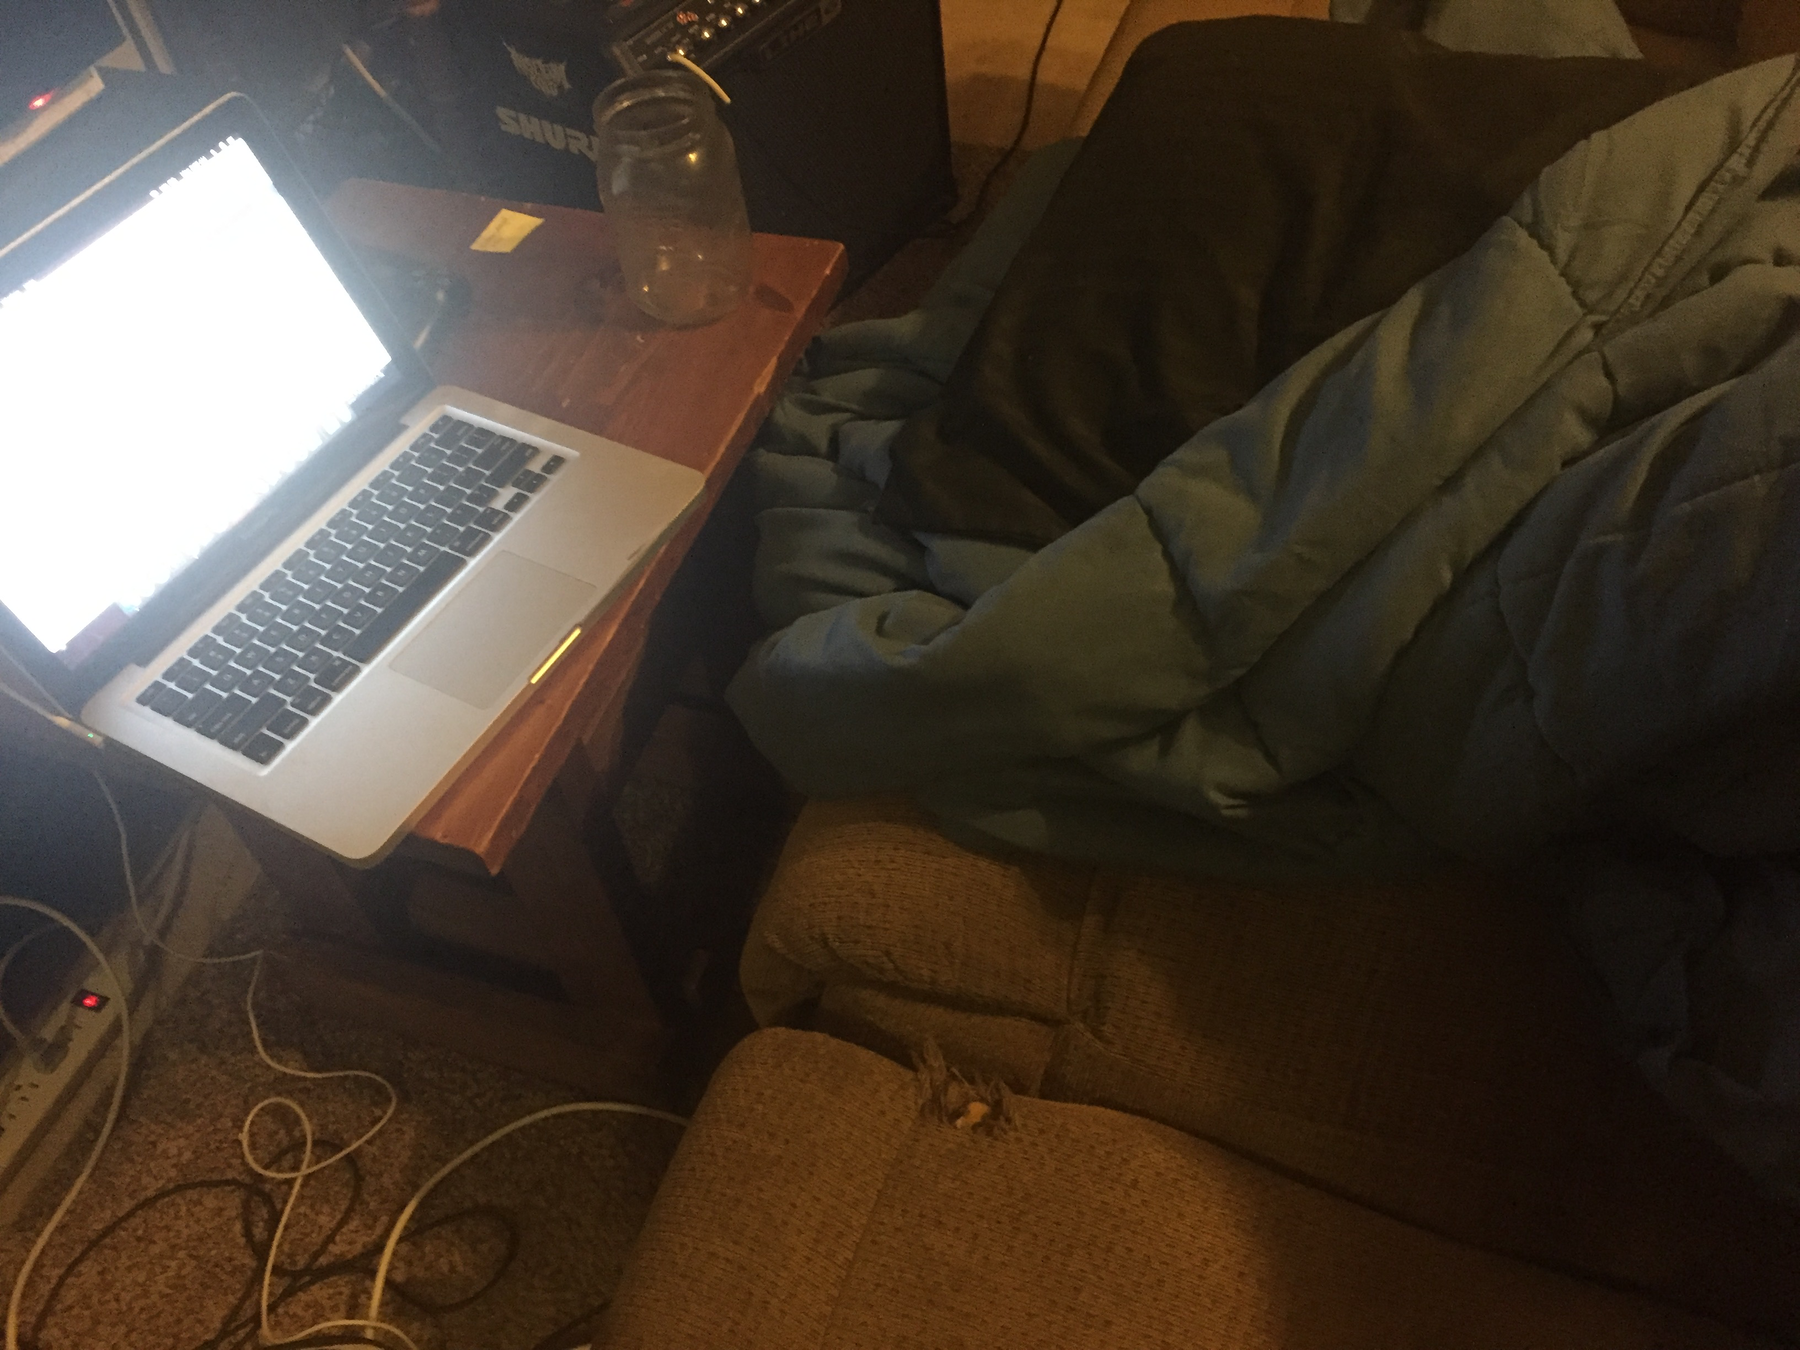 Computer on table next to sleeping bag and couch